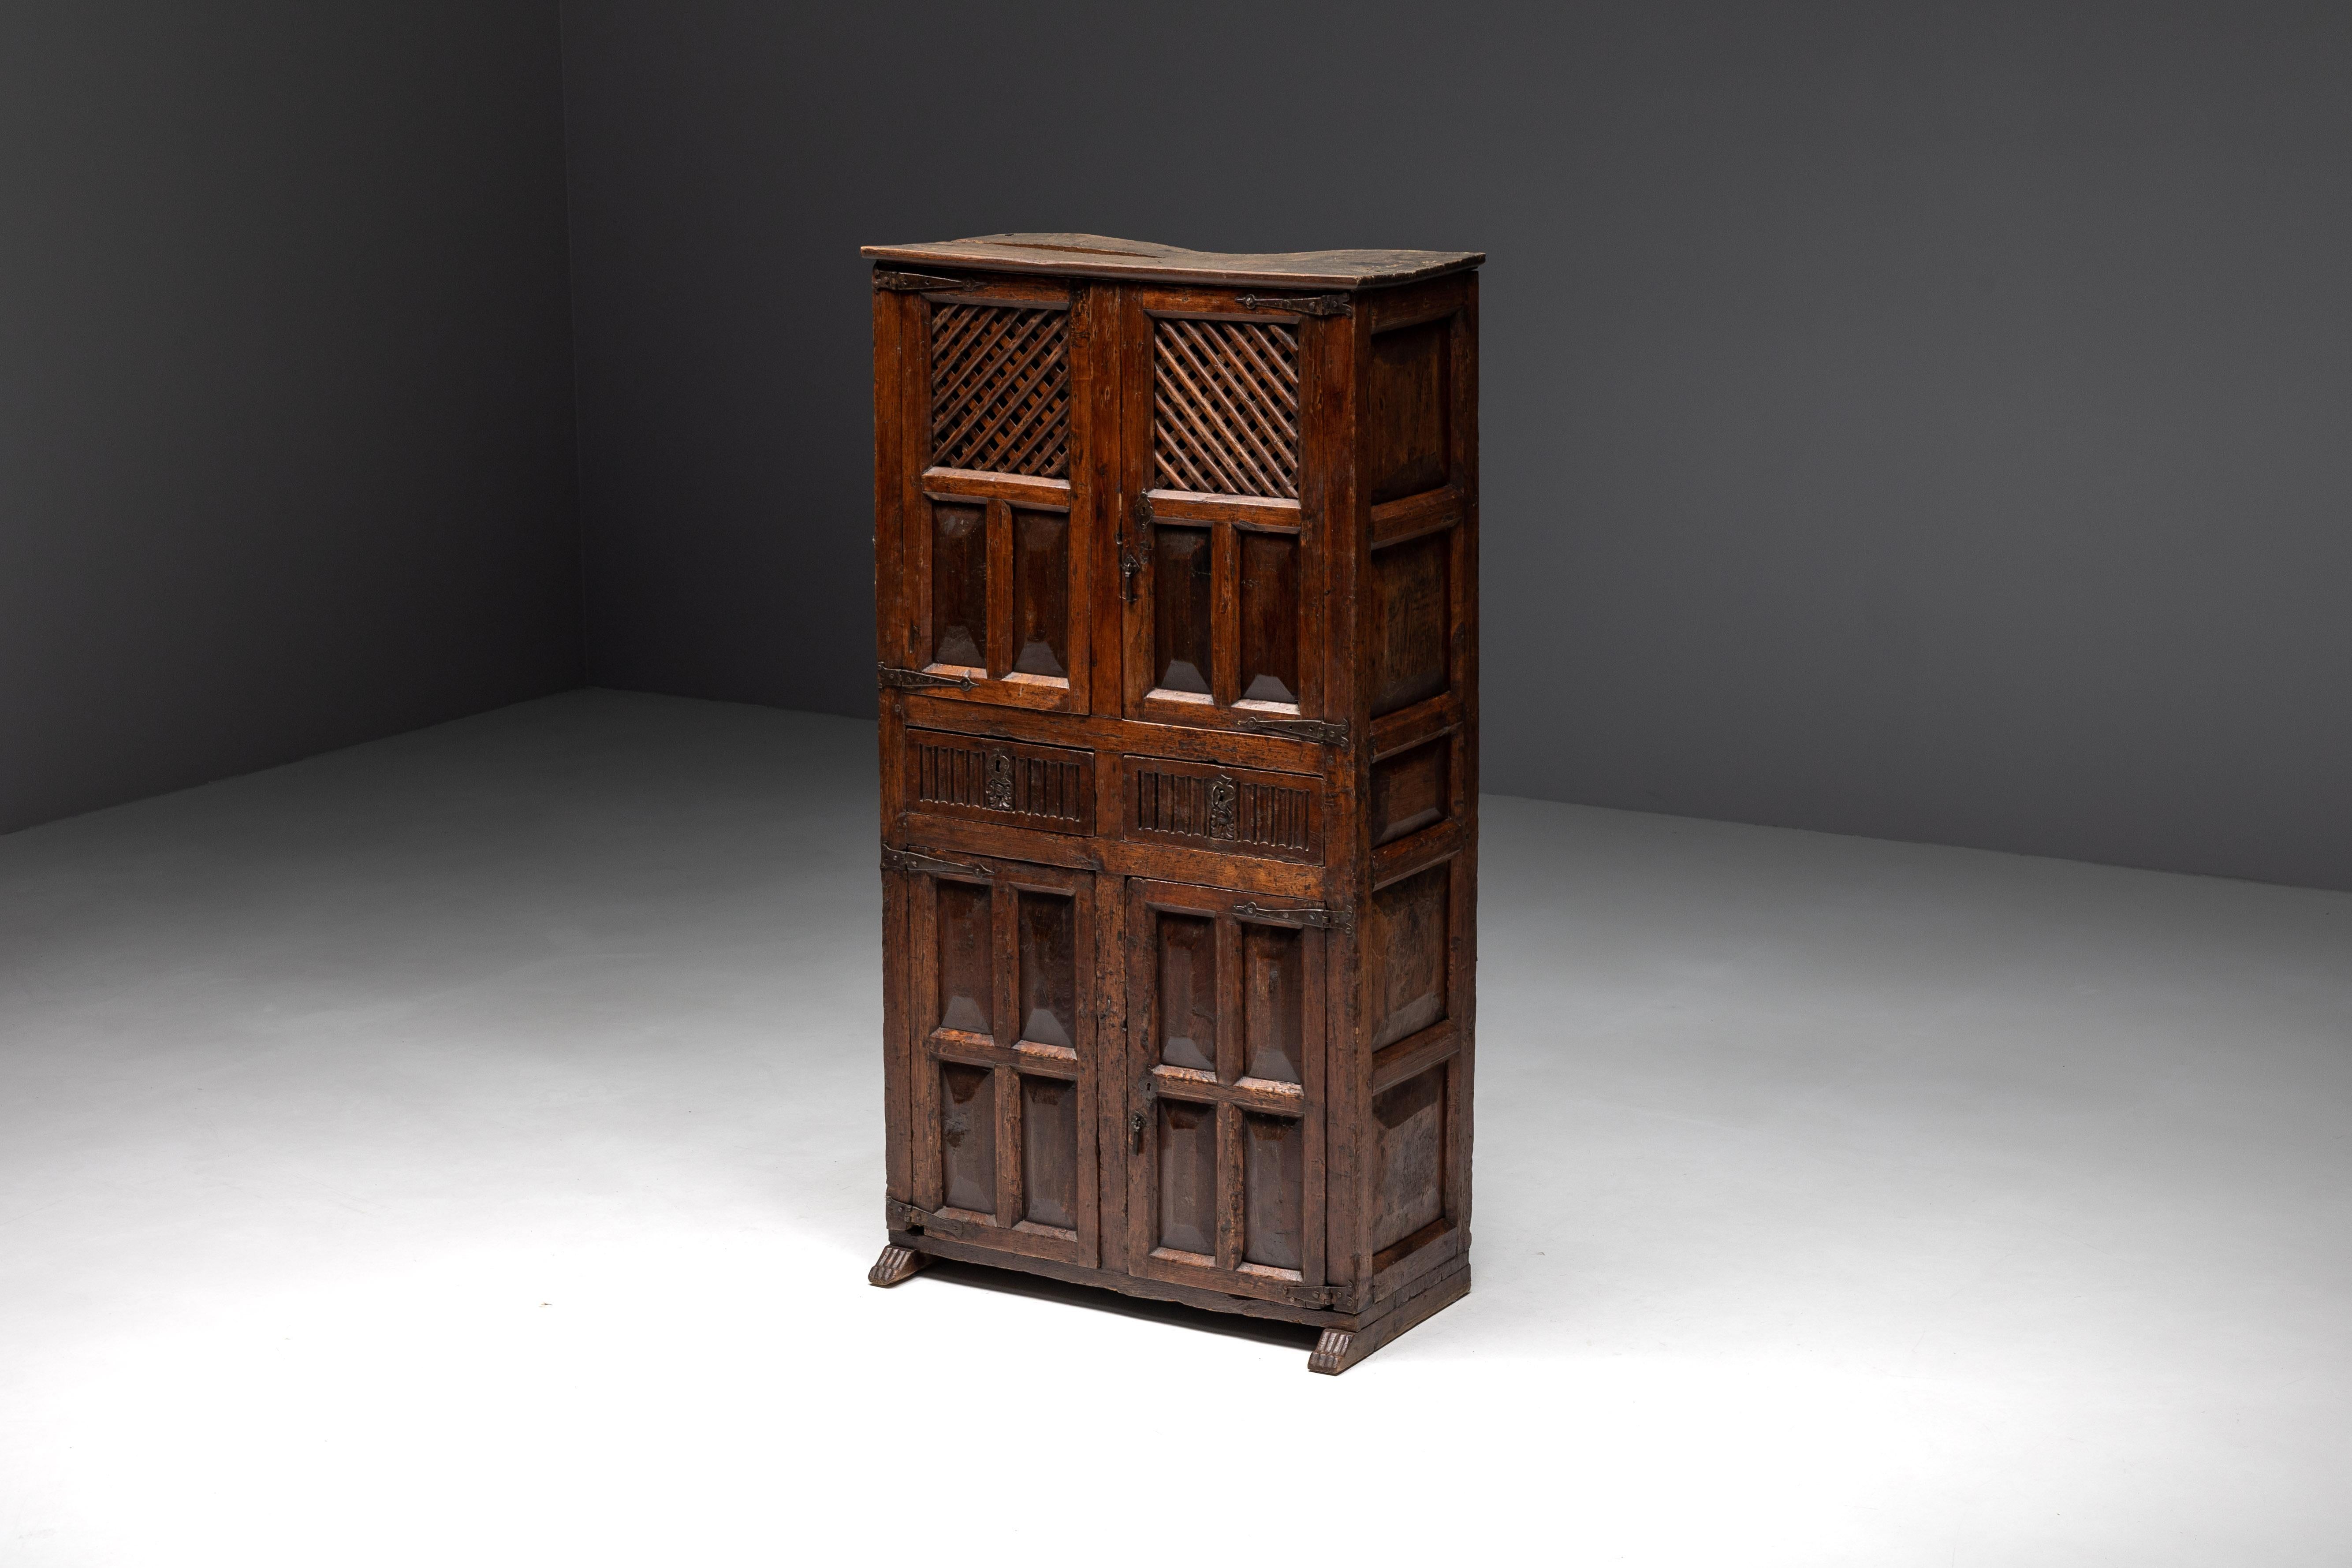 Solid dark wood pantry cabinet, a timeless masterpiece hailing from the Spanish Pyrenees, dating back to the 1800s. This stunning piece features two drawers and well-designed shelves both above and below the drawers, providing ample storage for your